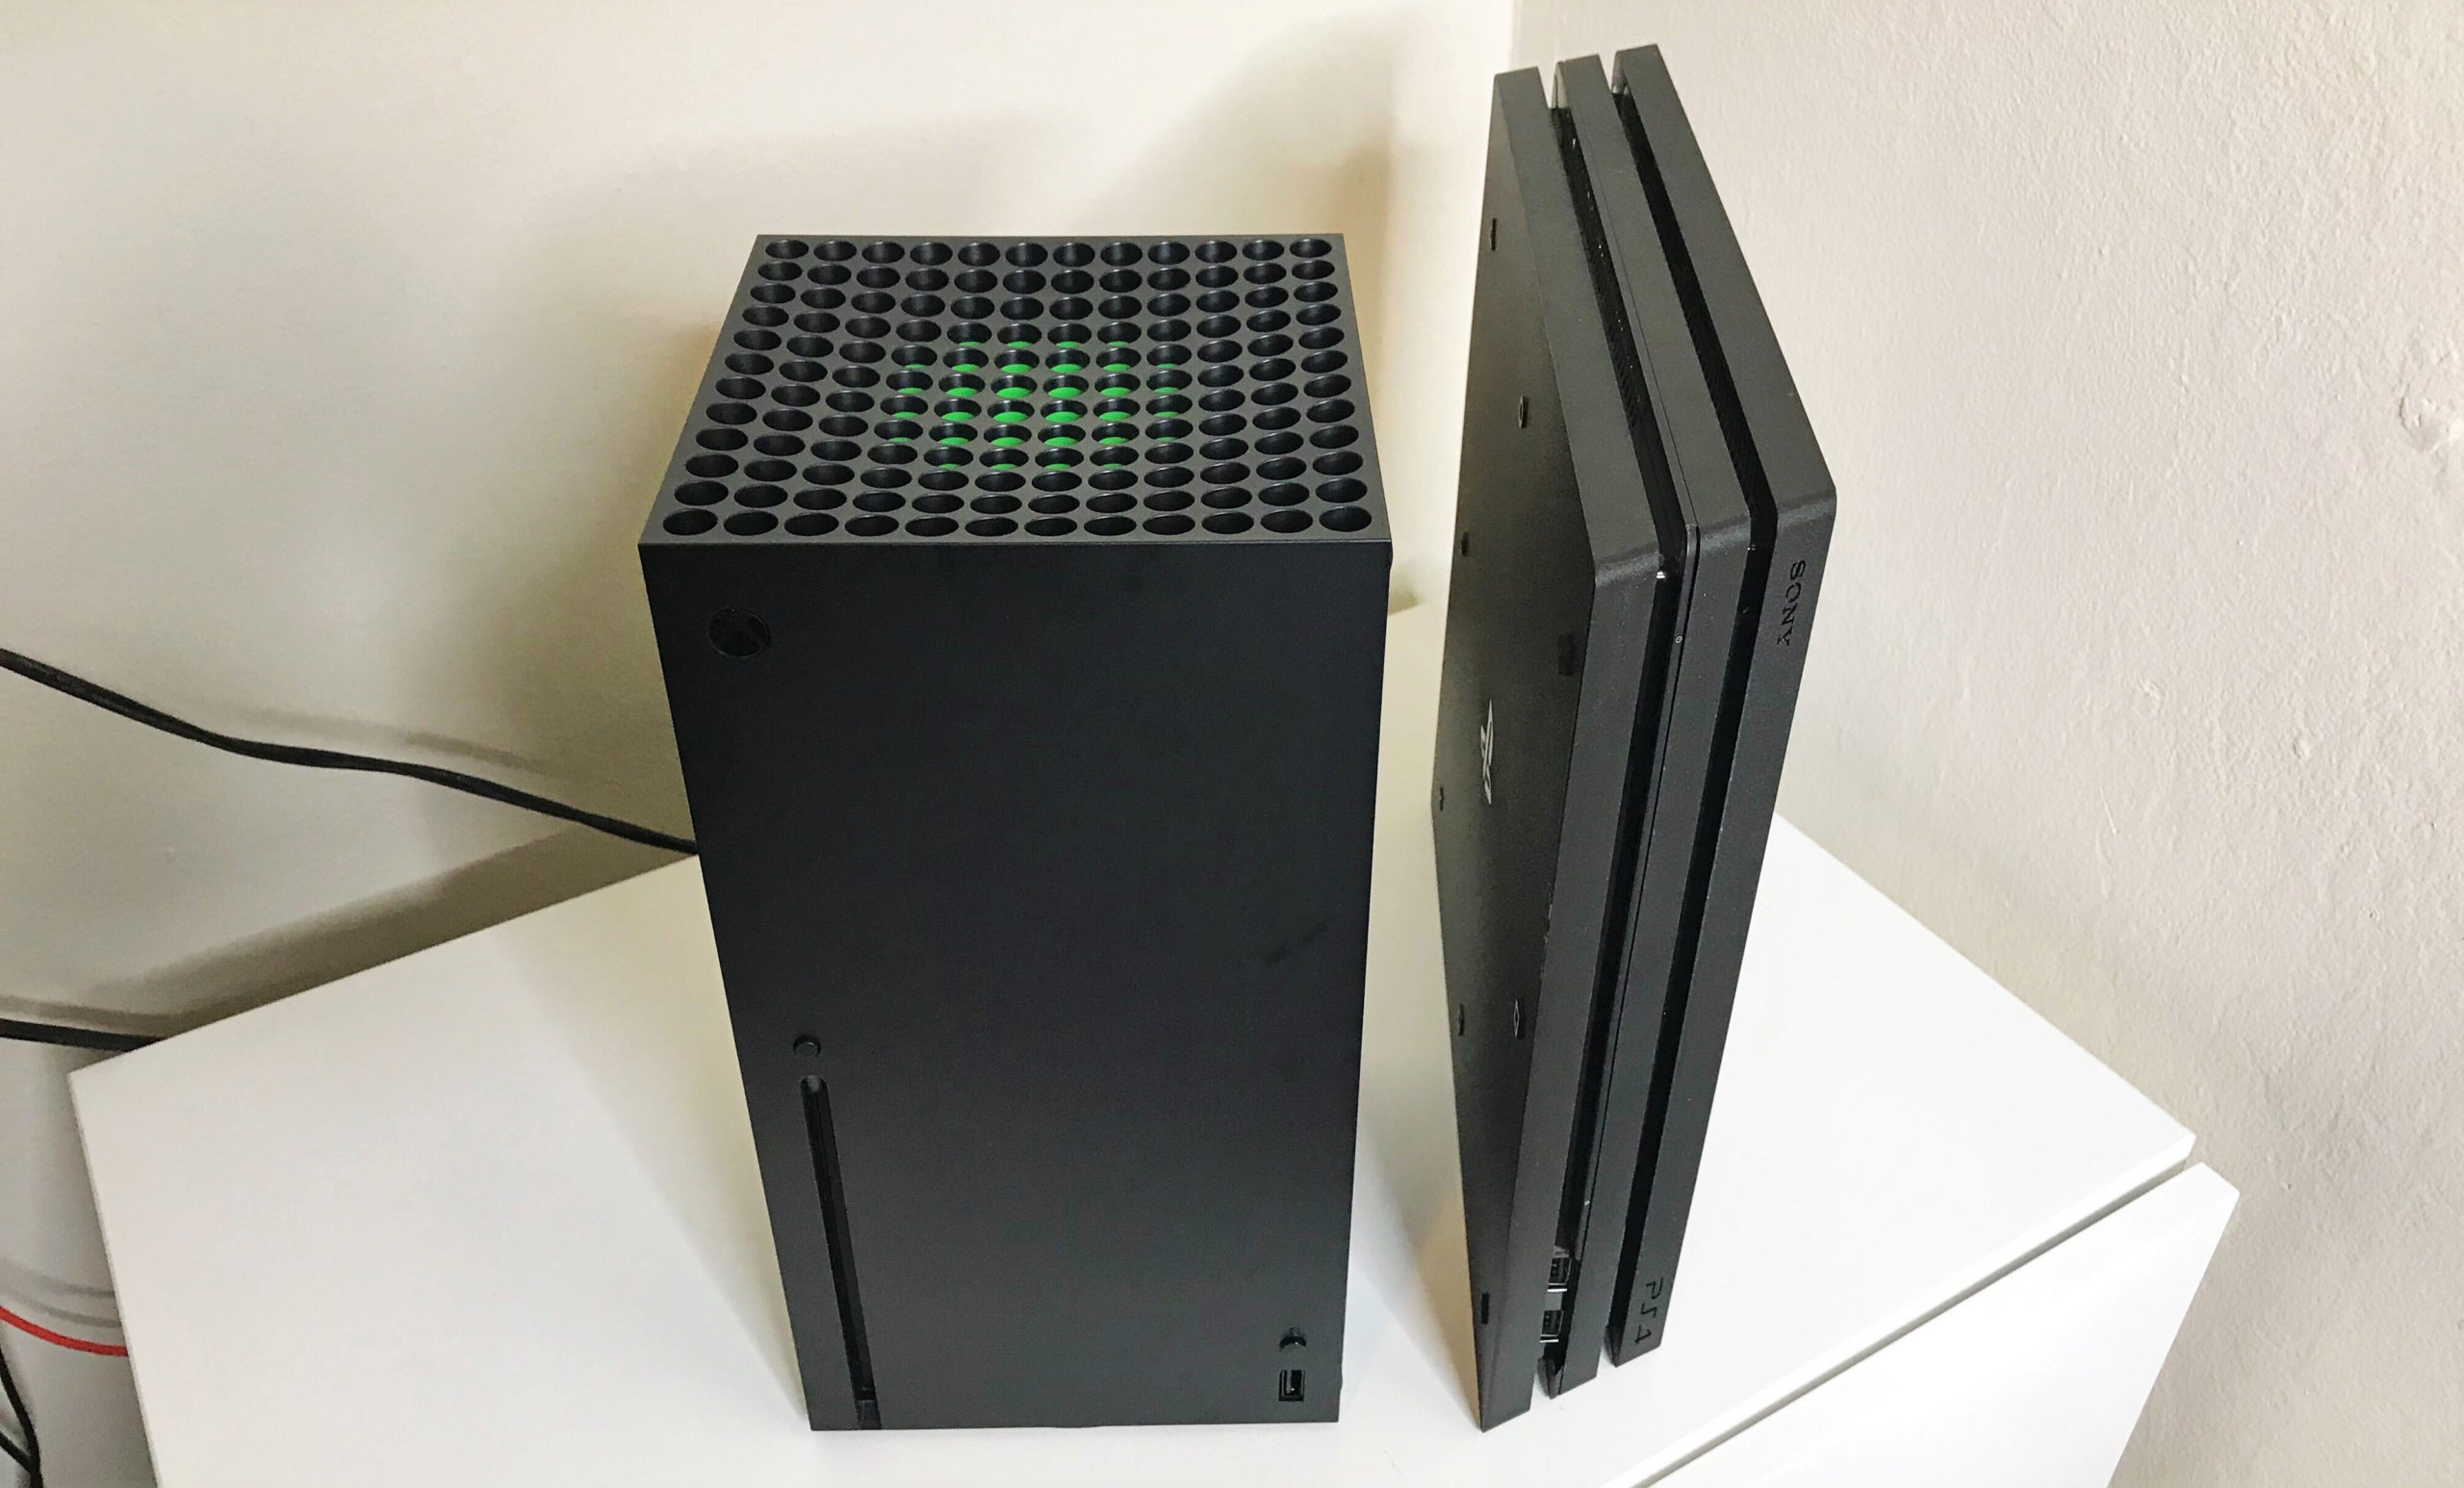 I Don’t Think We’re Ready For How Big The Xbox Series X Really Is